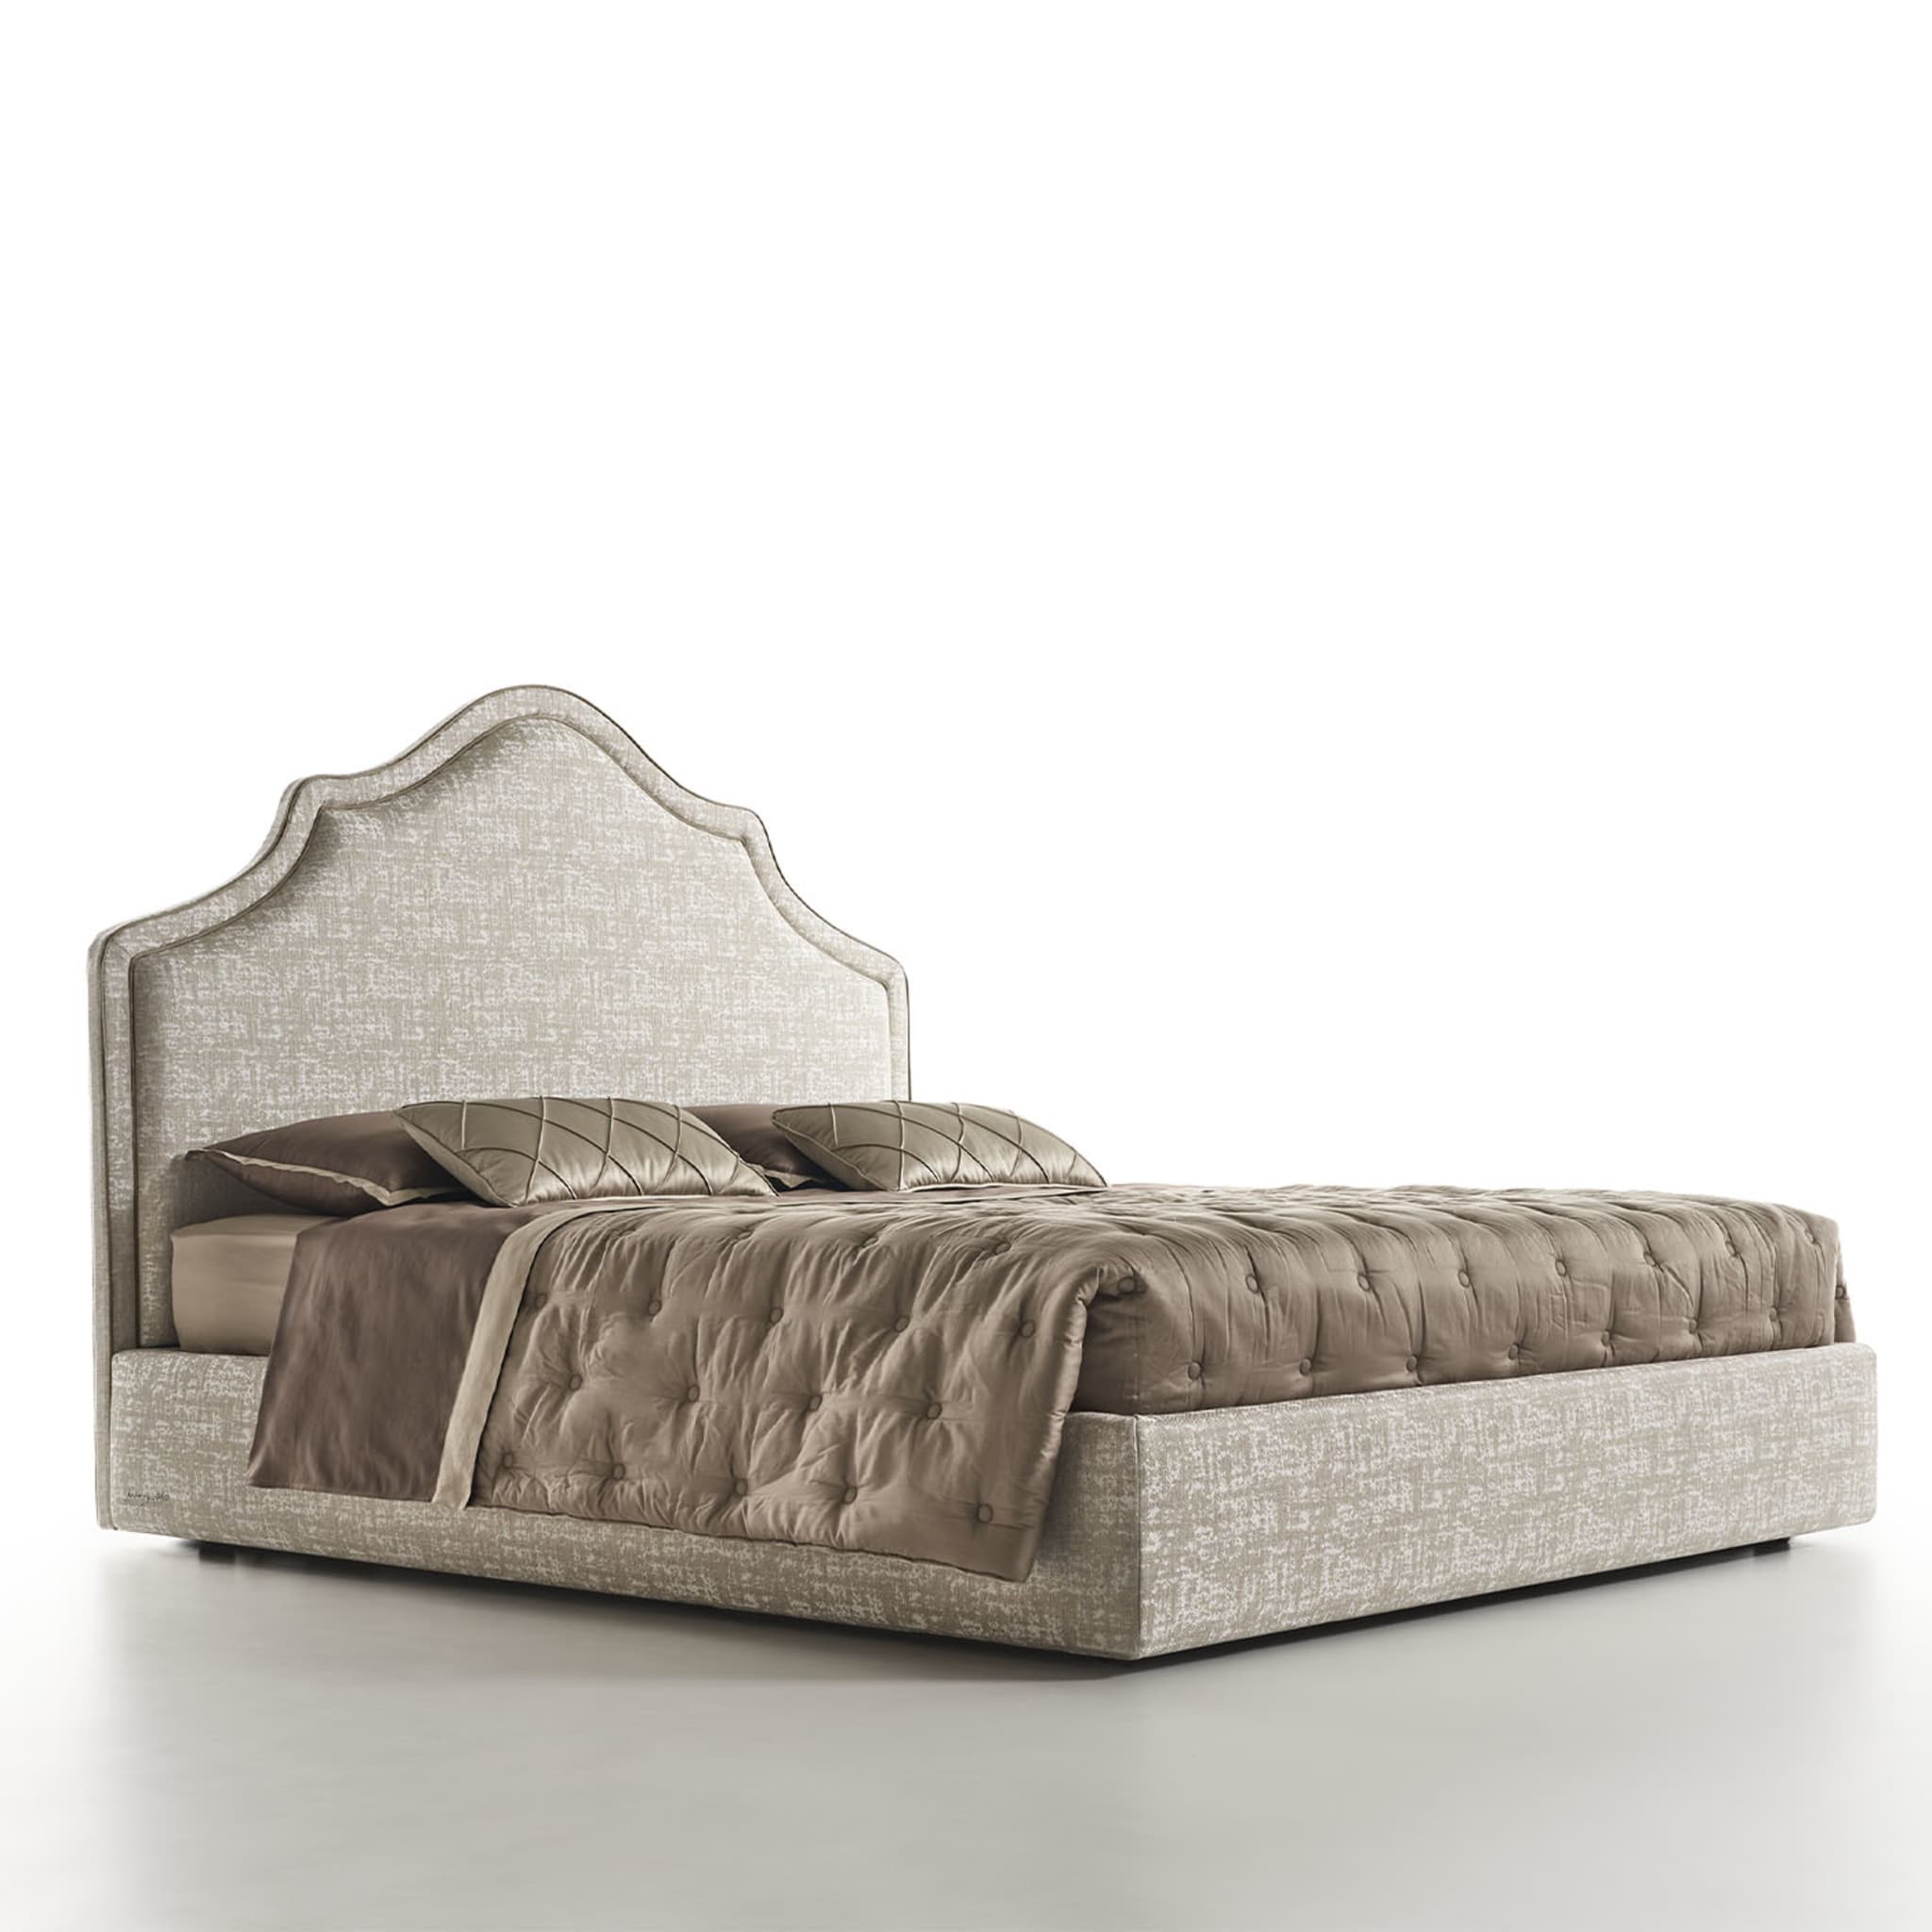 Alan Melange Taupe Double Bed - Alternative view 1